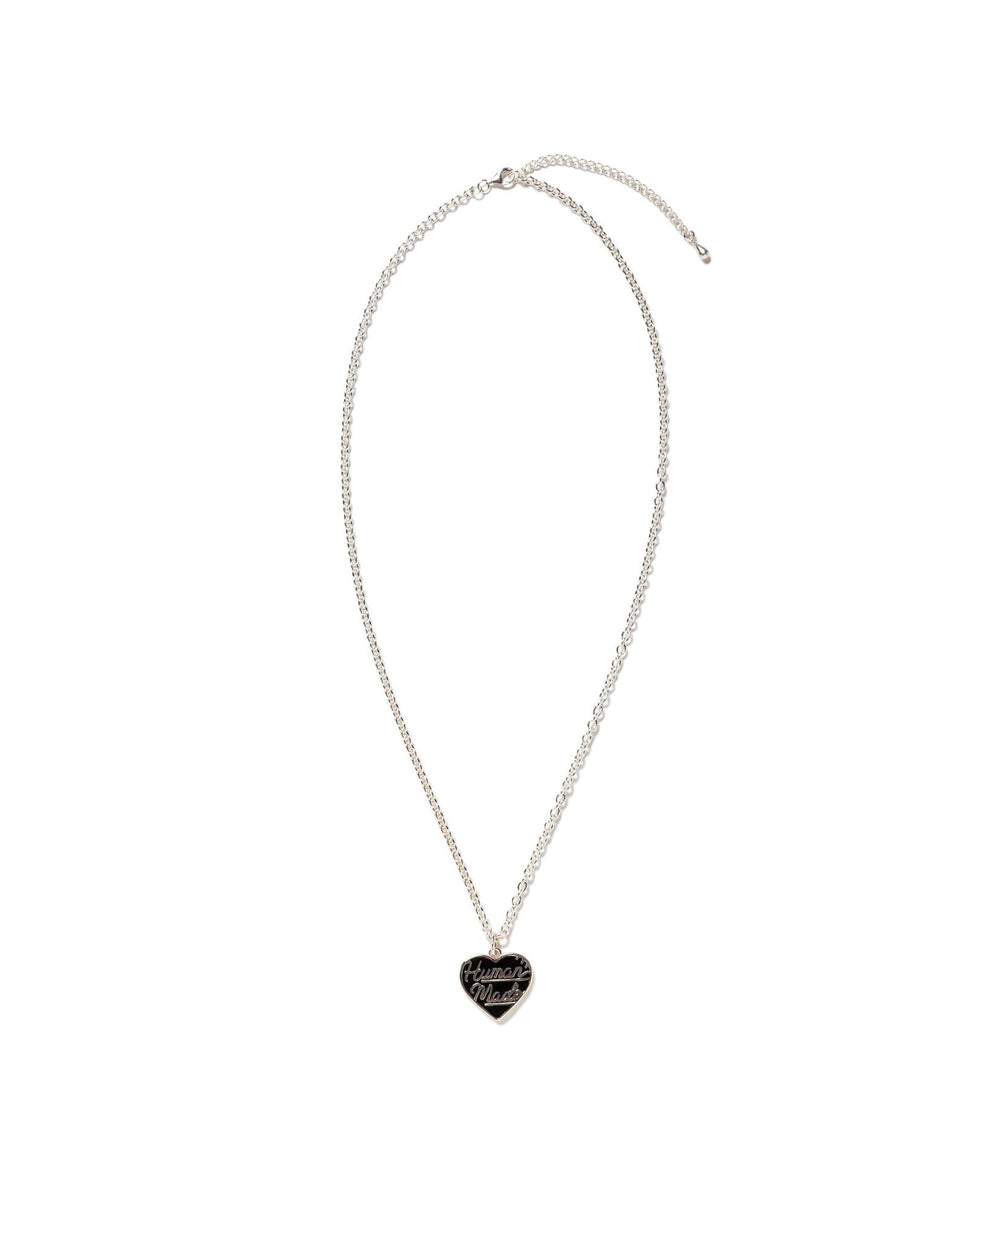 Human Made Heart Silver Necklace | STASHED